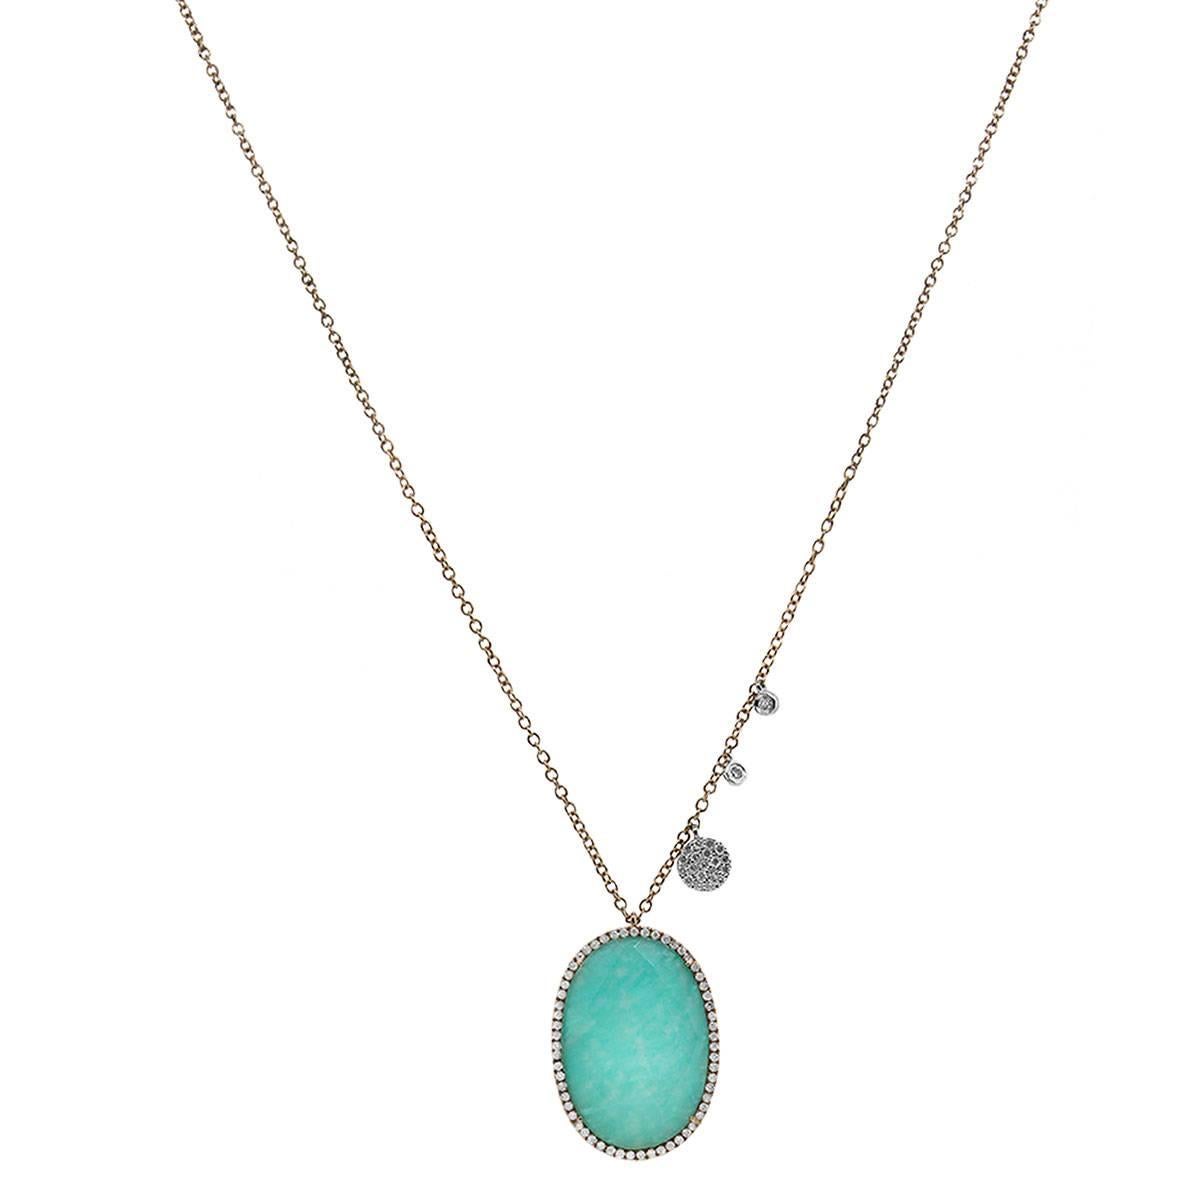 Material: 14k rose gold
Diamond Details: Approximately 0.41ctw round brilliant diamonds. Diamonds are G/H in color and VS in clarity.
Gemstone Details: Oval Amazonite gemstone measuring approximately 21mm x 15.04mm
Necklace Measurements: 16″
Clasp: